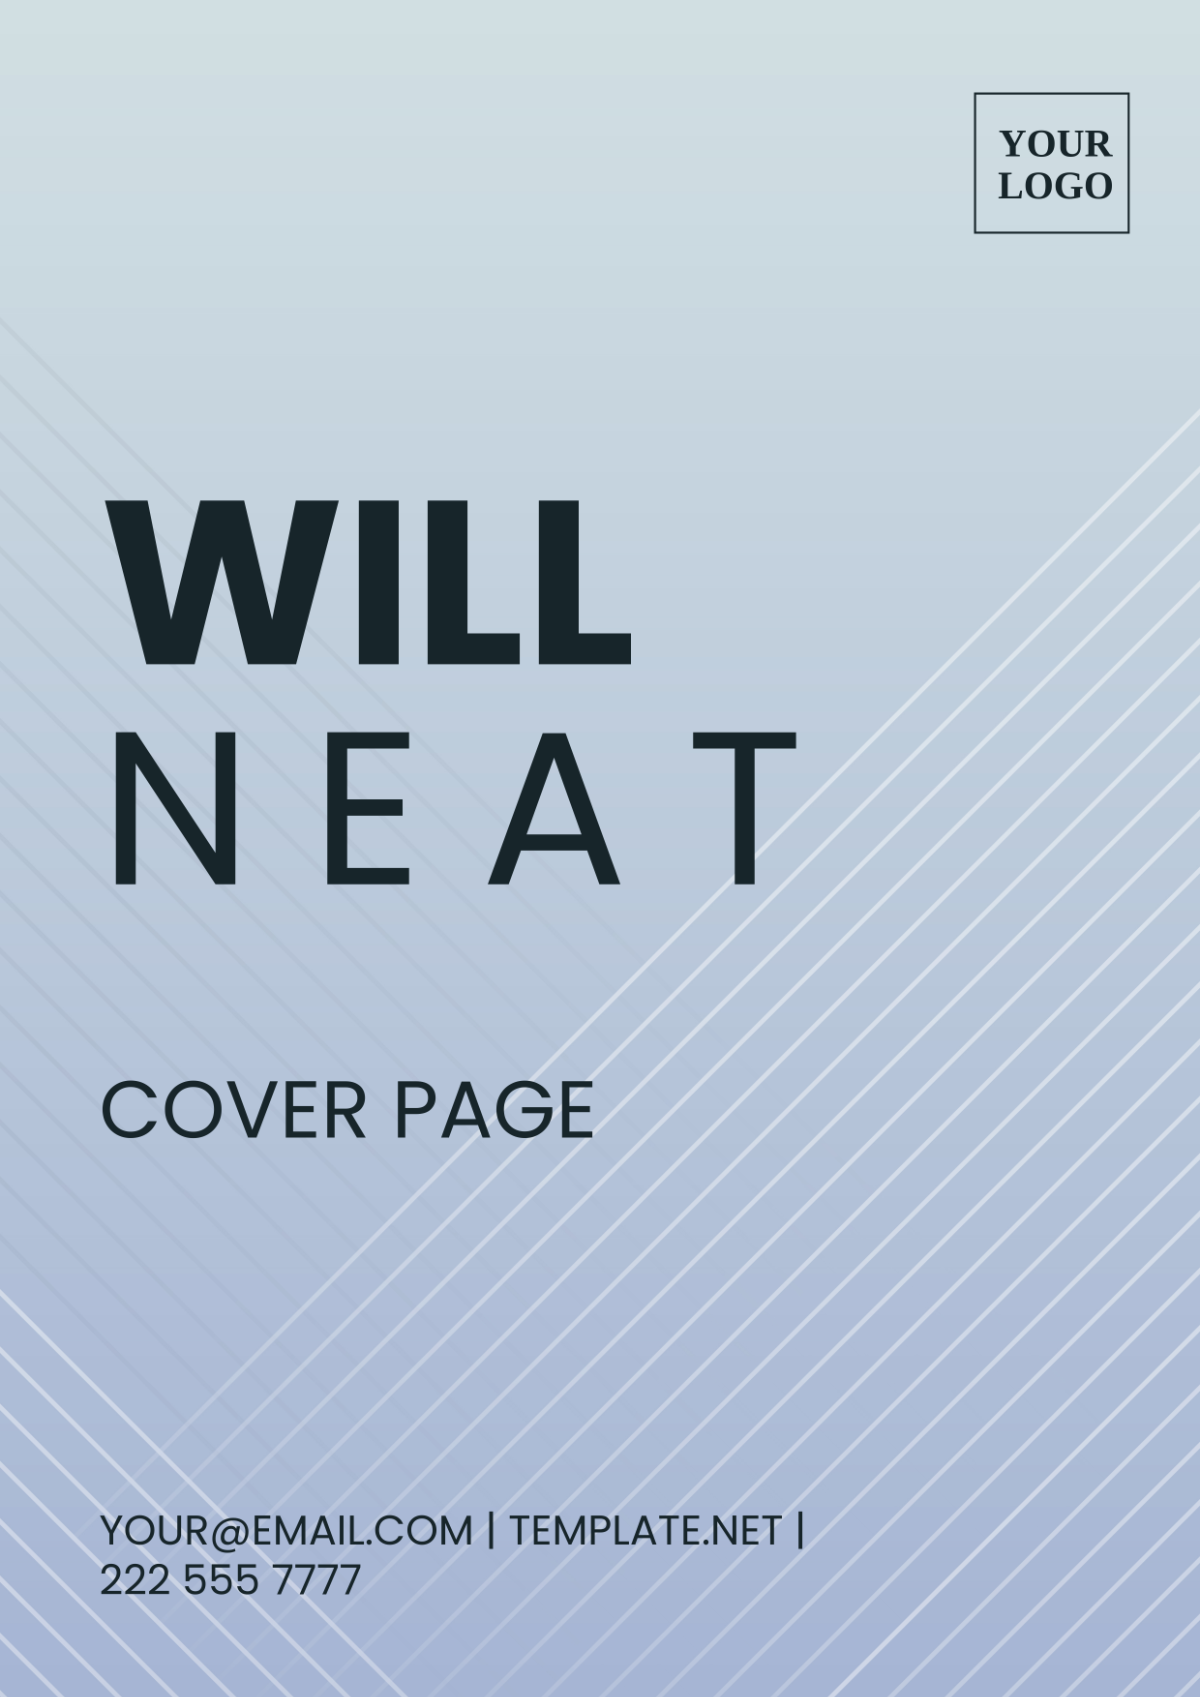 Will Neat Cover Page